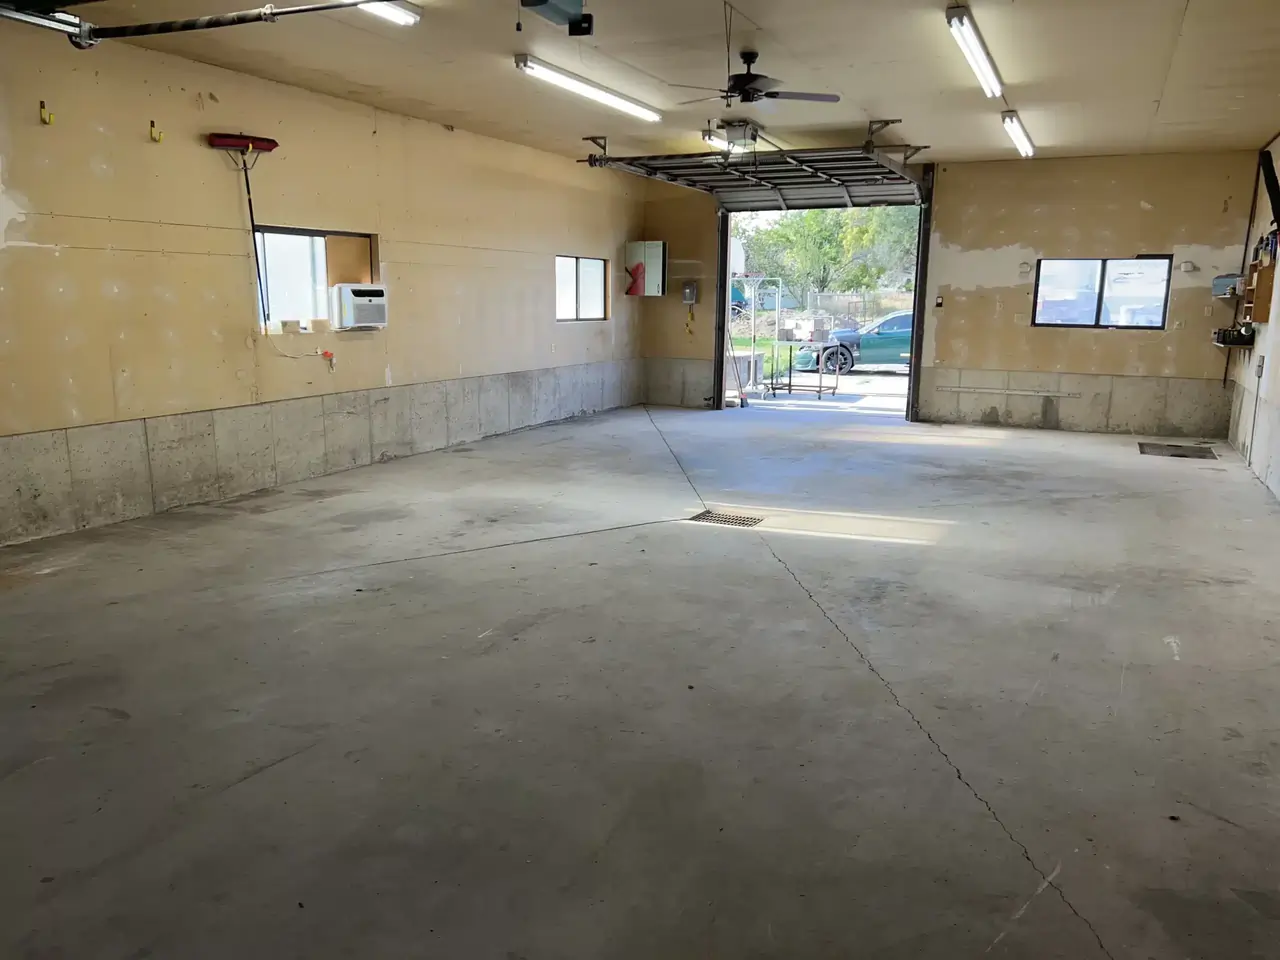 A before photo of an empty warehouse with a rugged-looking concrete floor and open window.